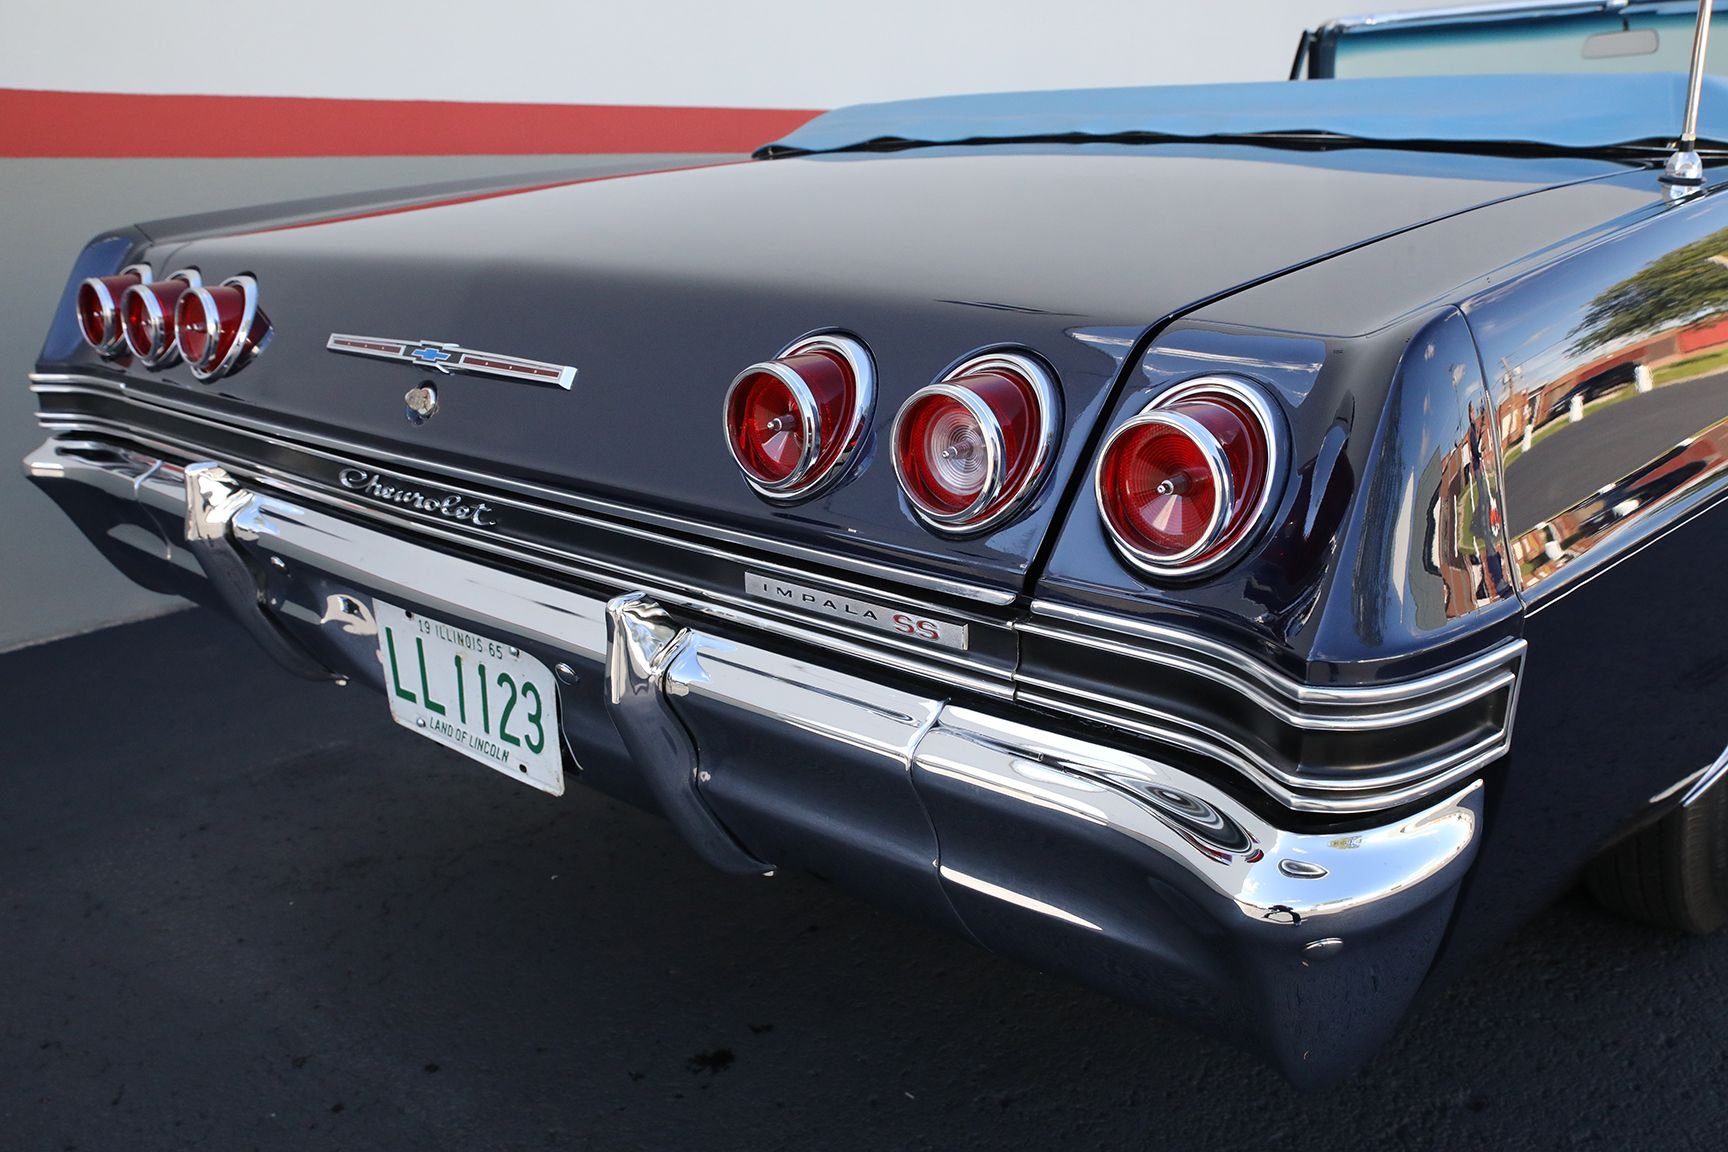 For Sale 1965 Chevrolet Impala Convertible